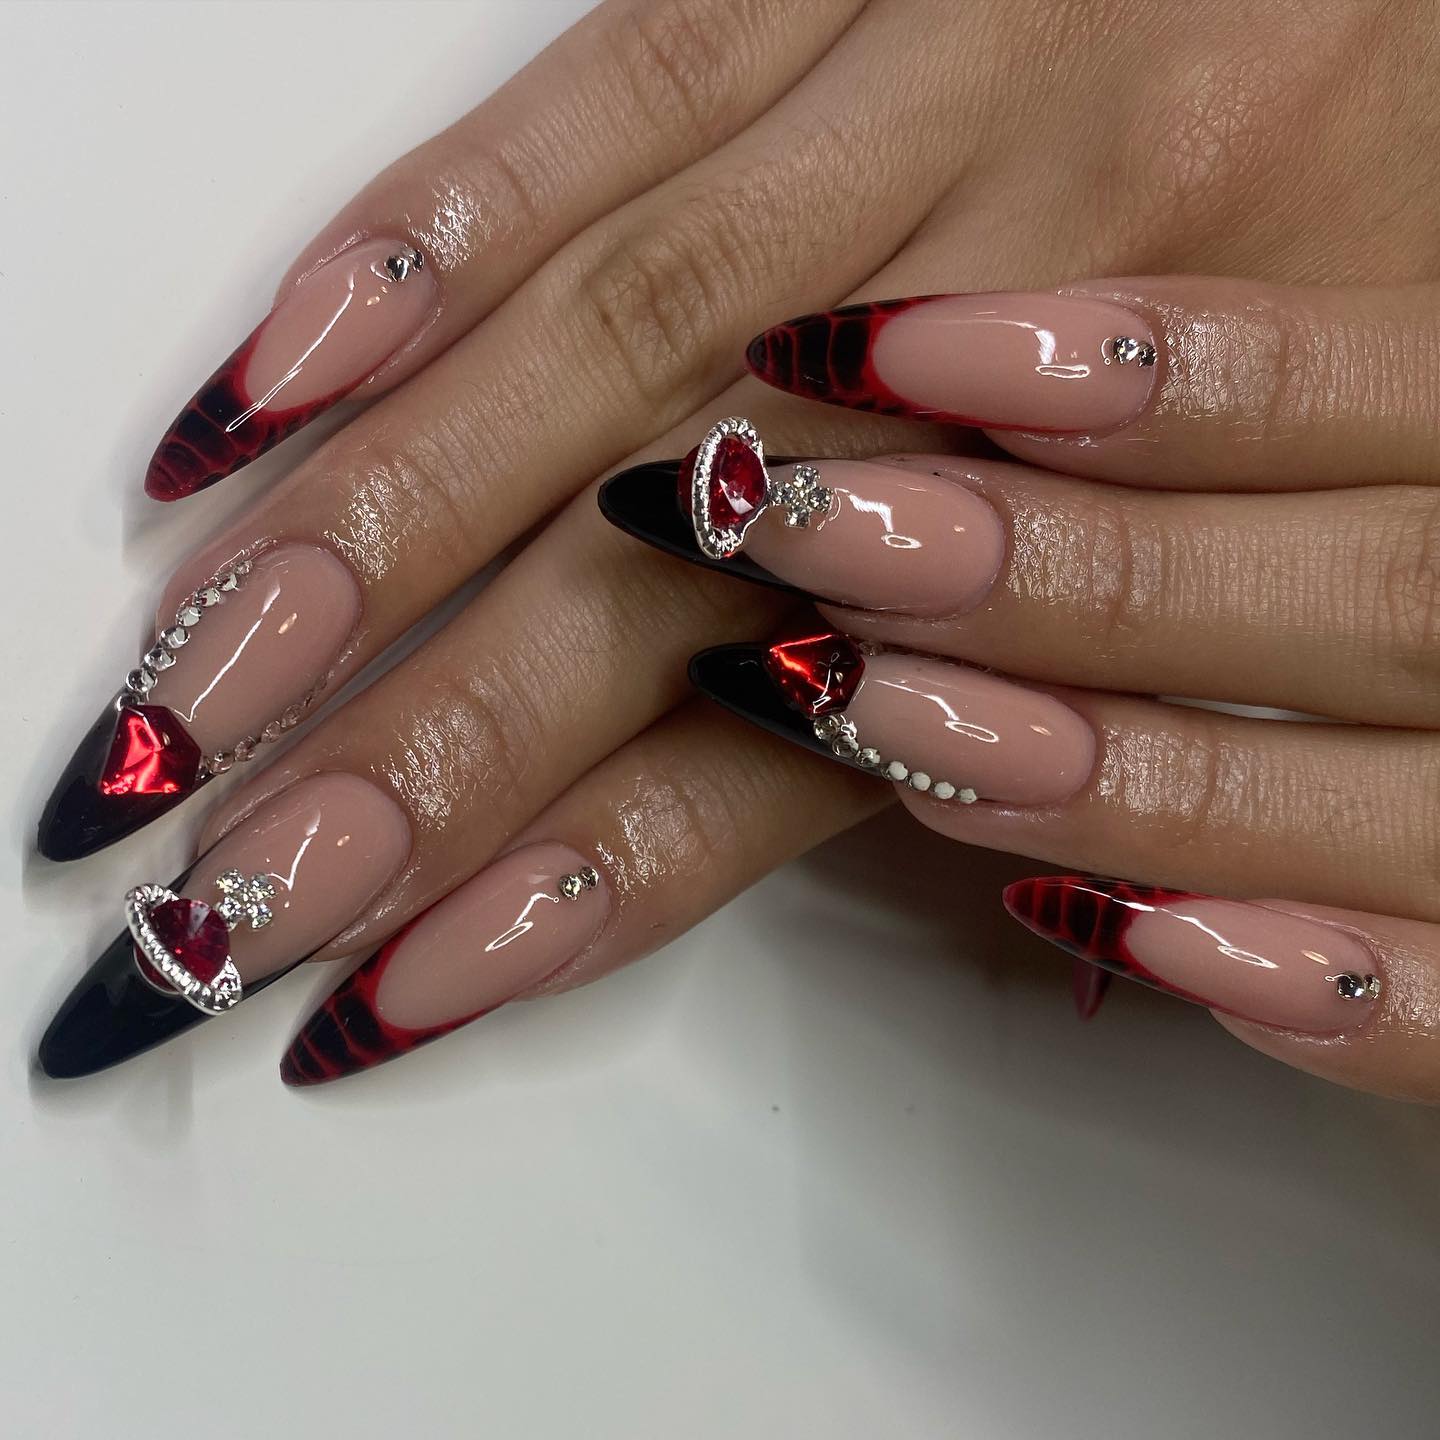 No words are enough to describe this gorgeous look. For two accent nails, black and red French tips are created with a snake skin look while the other ones are decorated with stones and rubies. It is absolutely incredible!